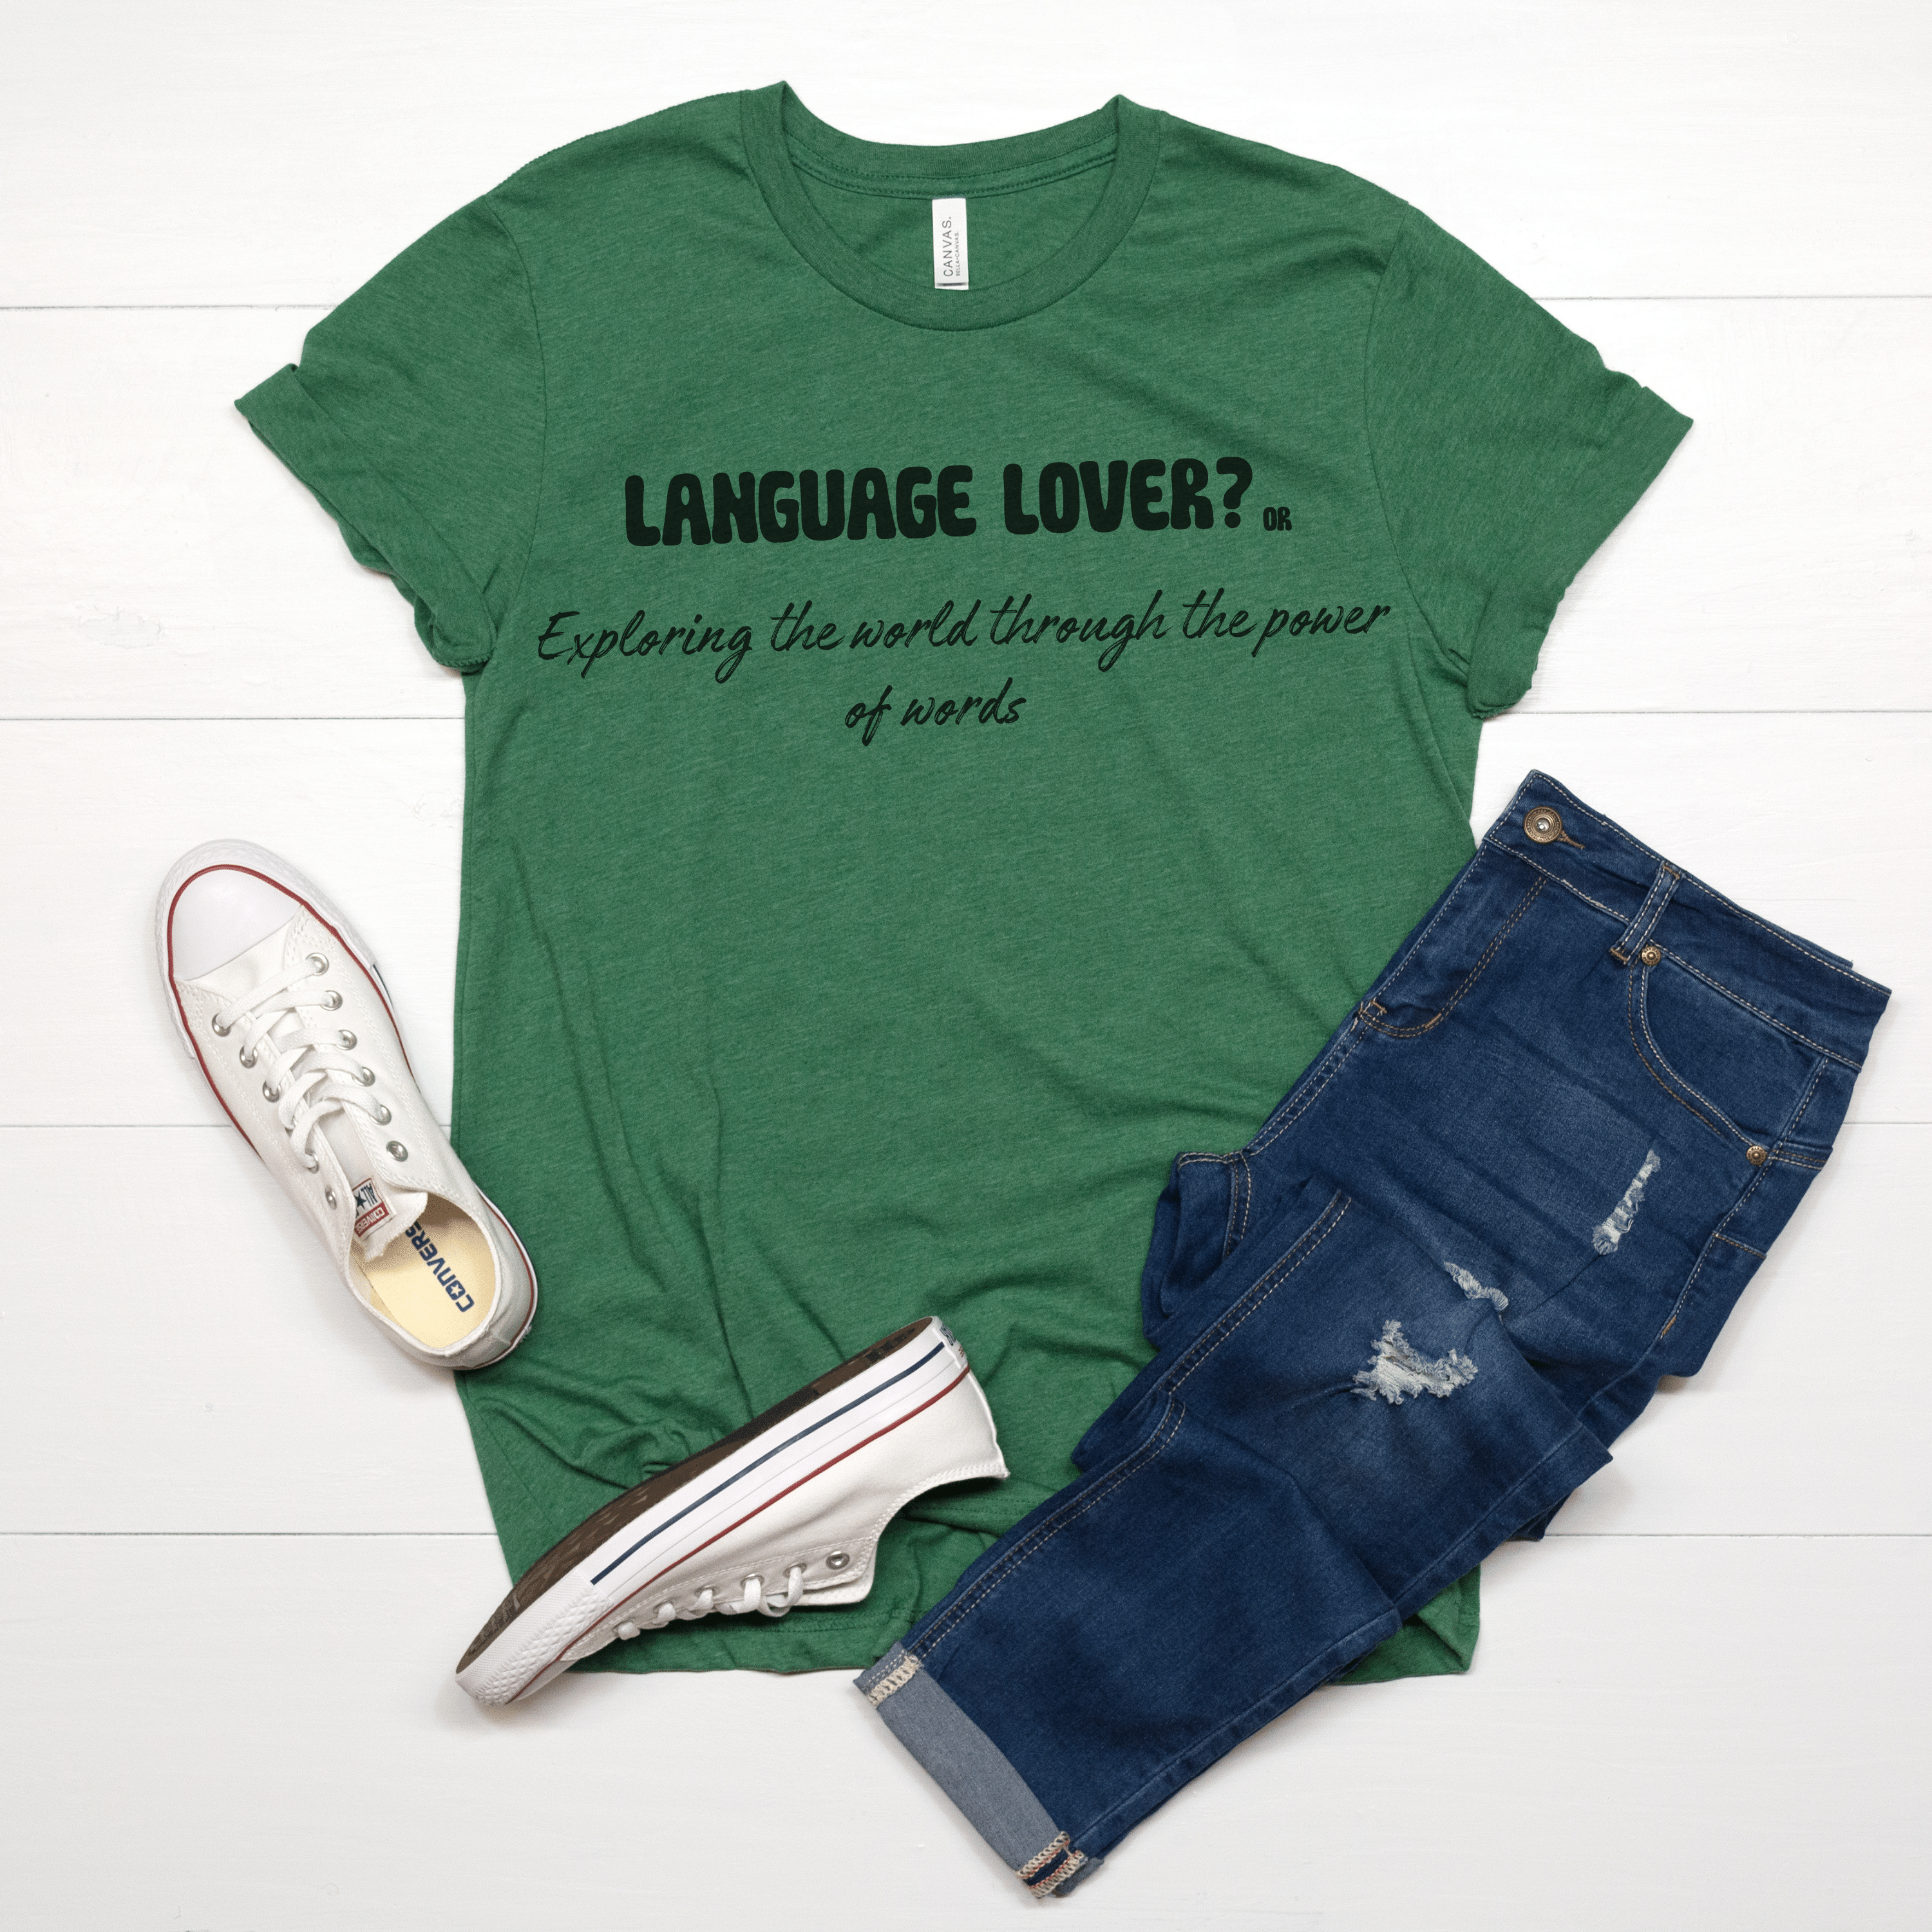 Language lover? or Exploring the world through the power of words T-shirt